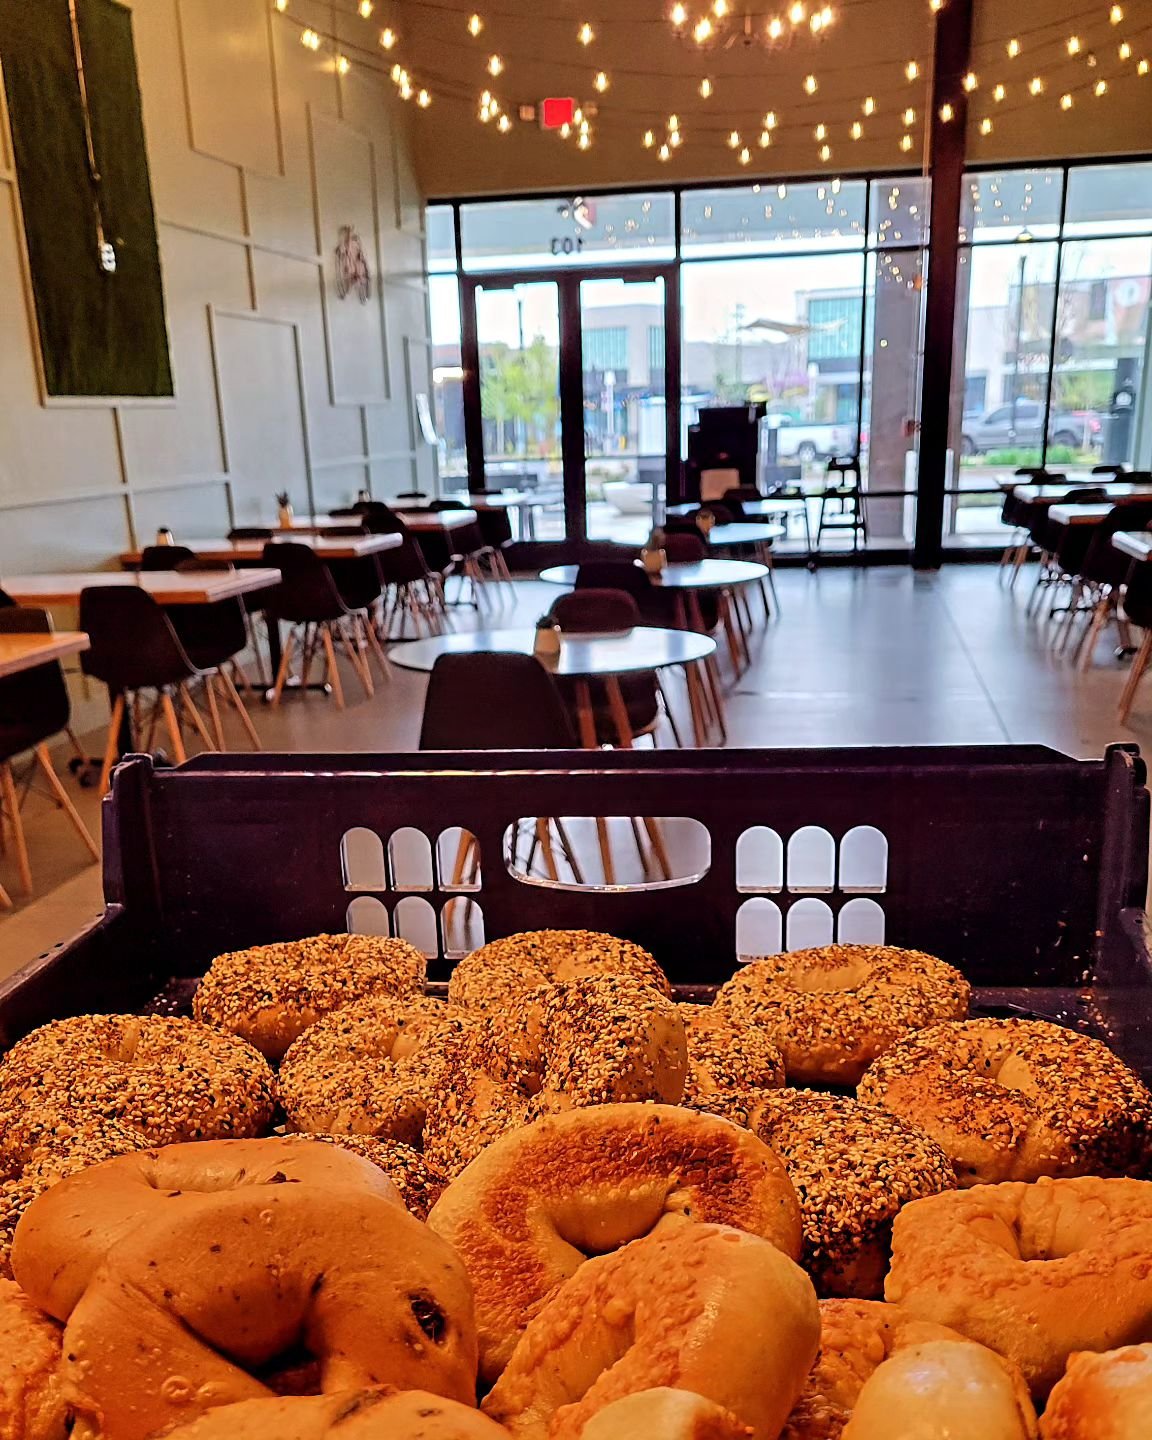 FRESH BAGELS JUST DELIVERD!

Did you know that our bagels are locally made by @doughysbagel and delivered fresh 2-3 times a week. 

We always have Everthing Bagels and Asiago Bagels as well as an occasional specialty.

Come in and try one of our spec